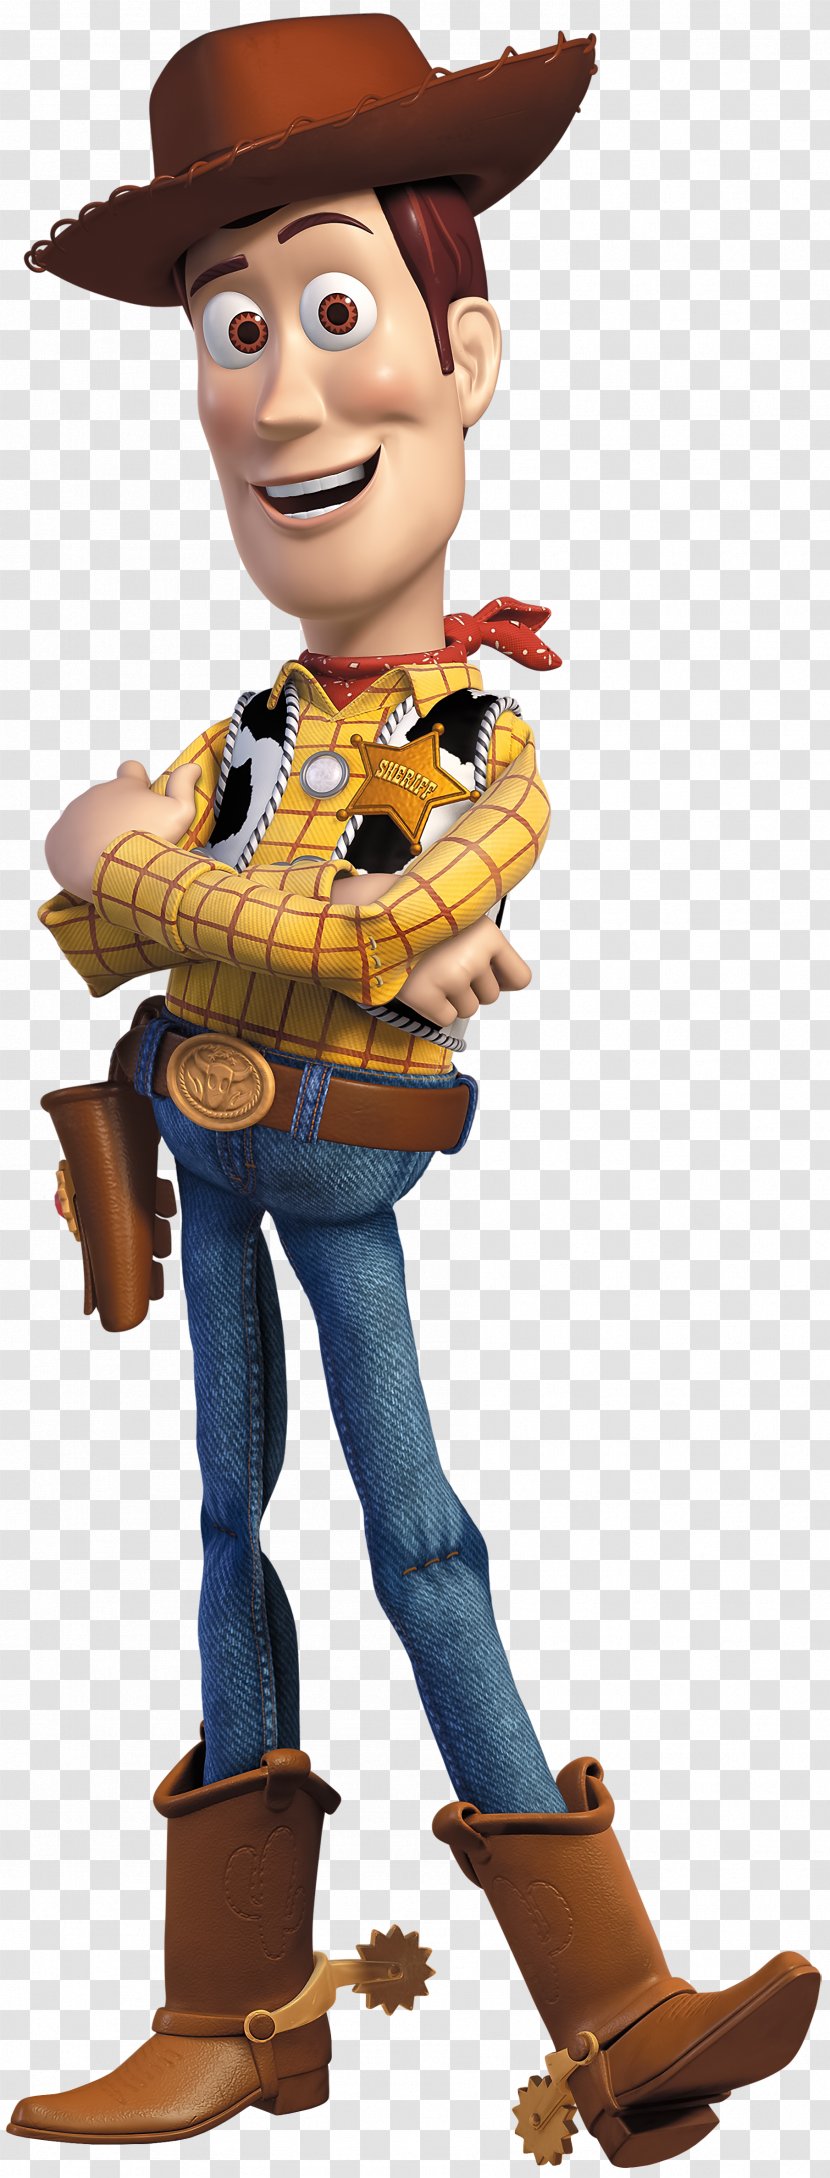 Sheriff Woody Toy Story 3: The Video Game Jessie Buzz Lightyear - Allen Transparent PNG